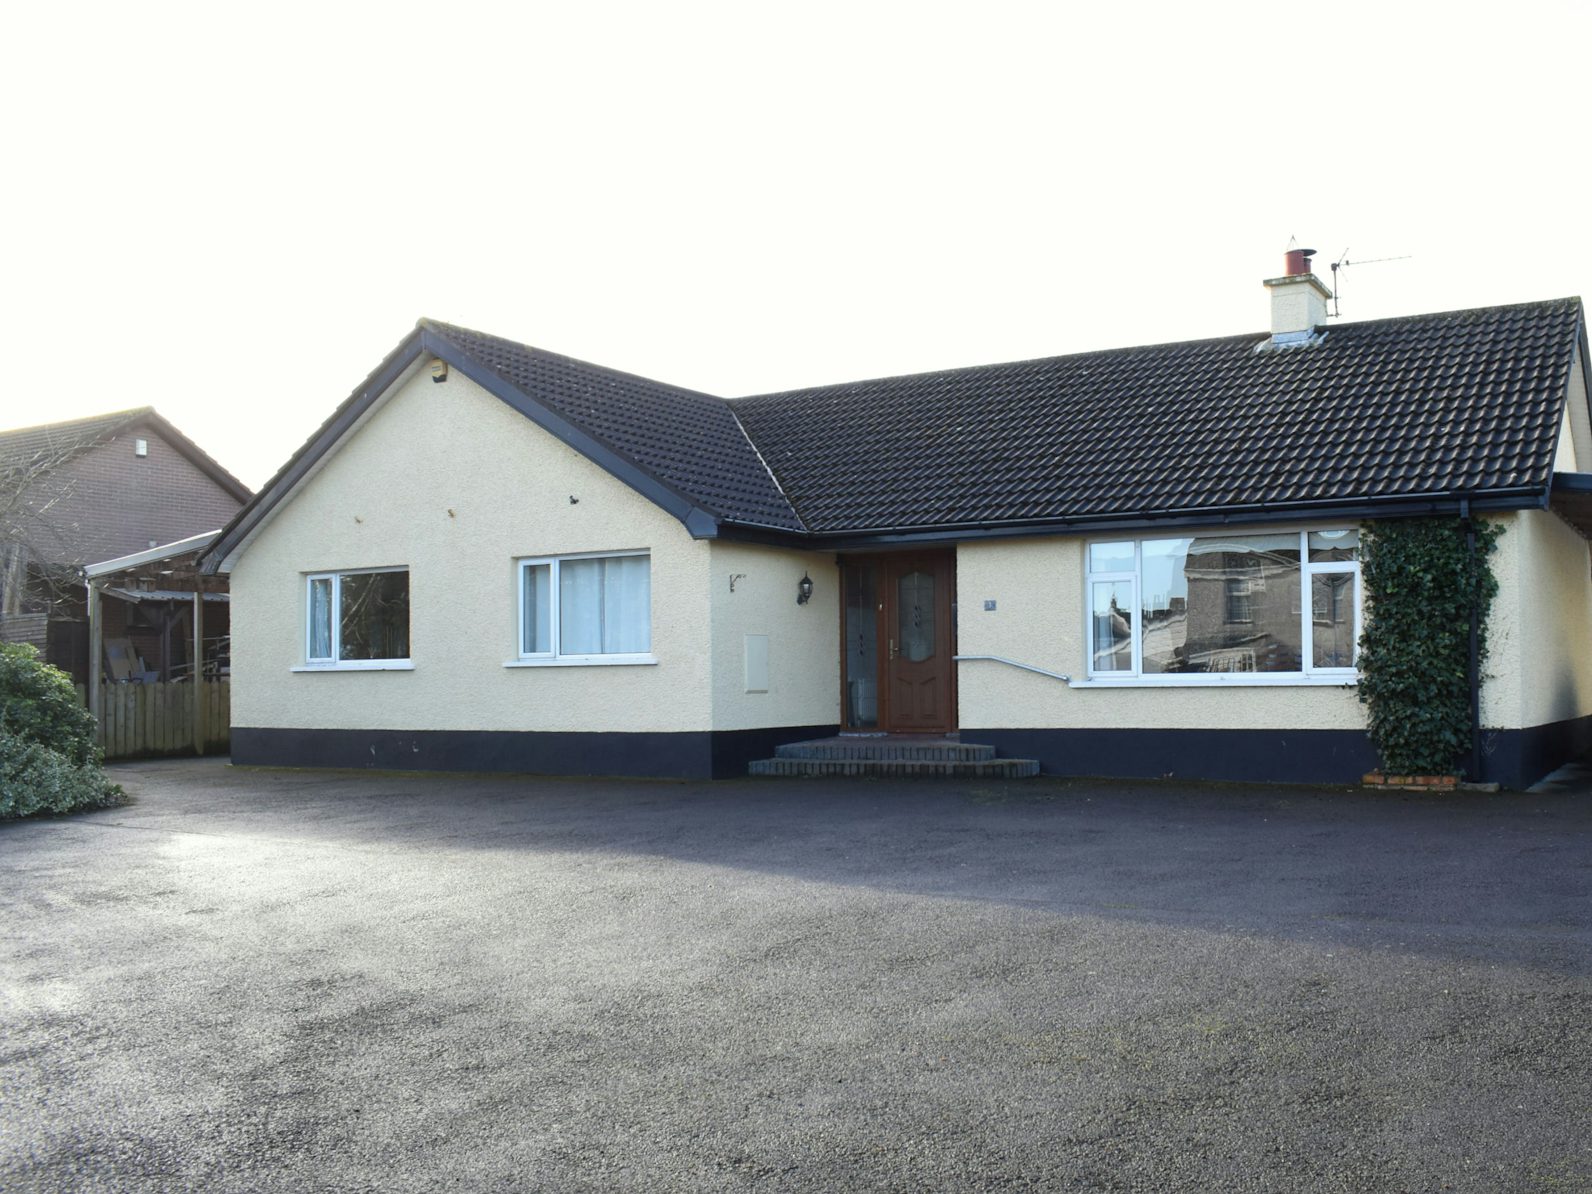 Bungalow to rent on Church Road Carrowdore, BT22